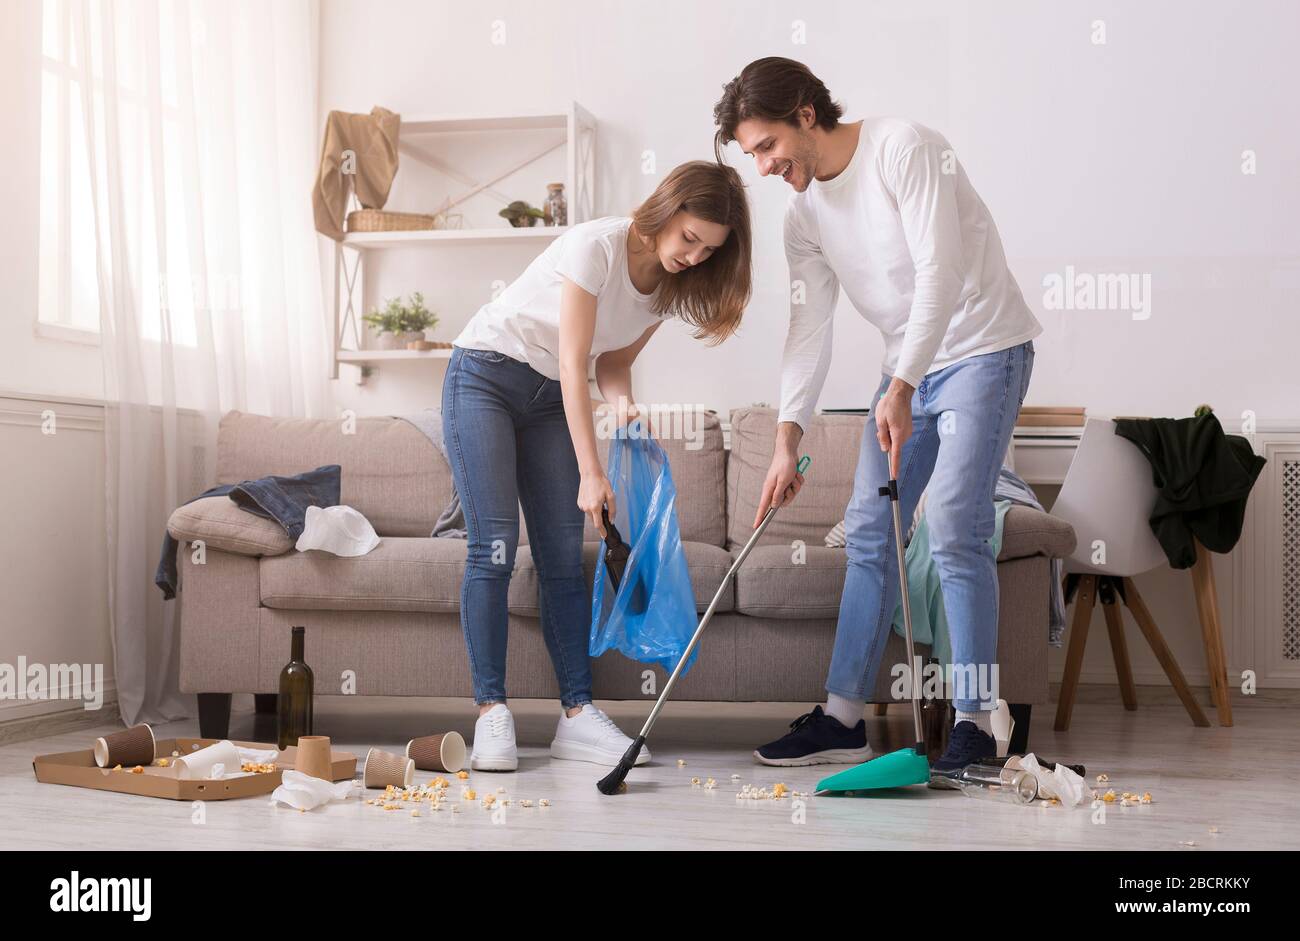 Couple Cleaning Messy Room After Party, Sweeping Floor And Collecting Garbage Stock Photo